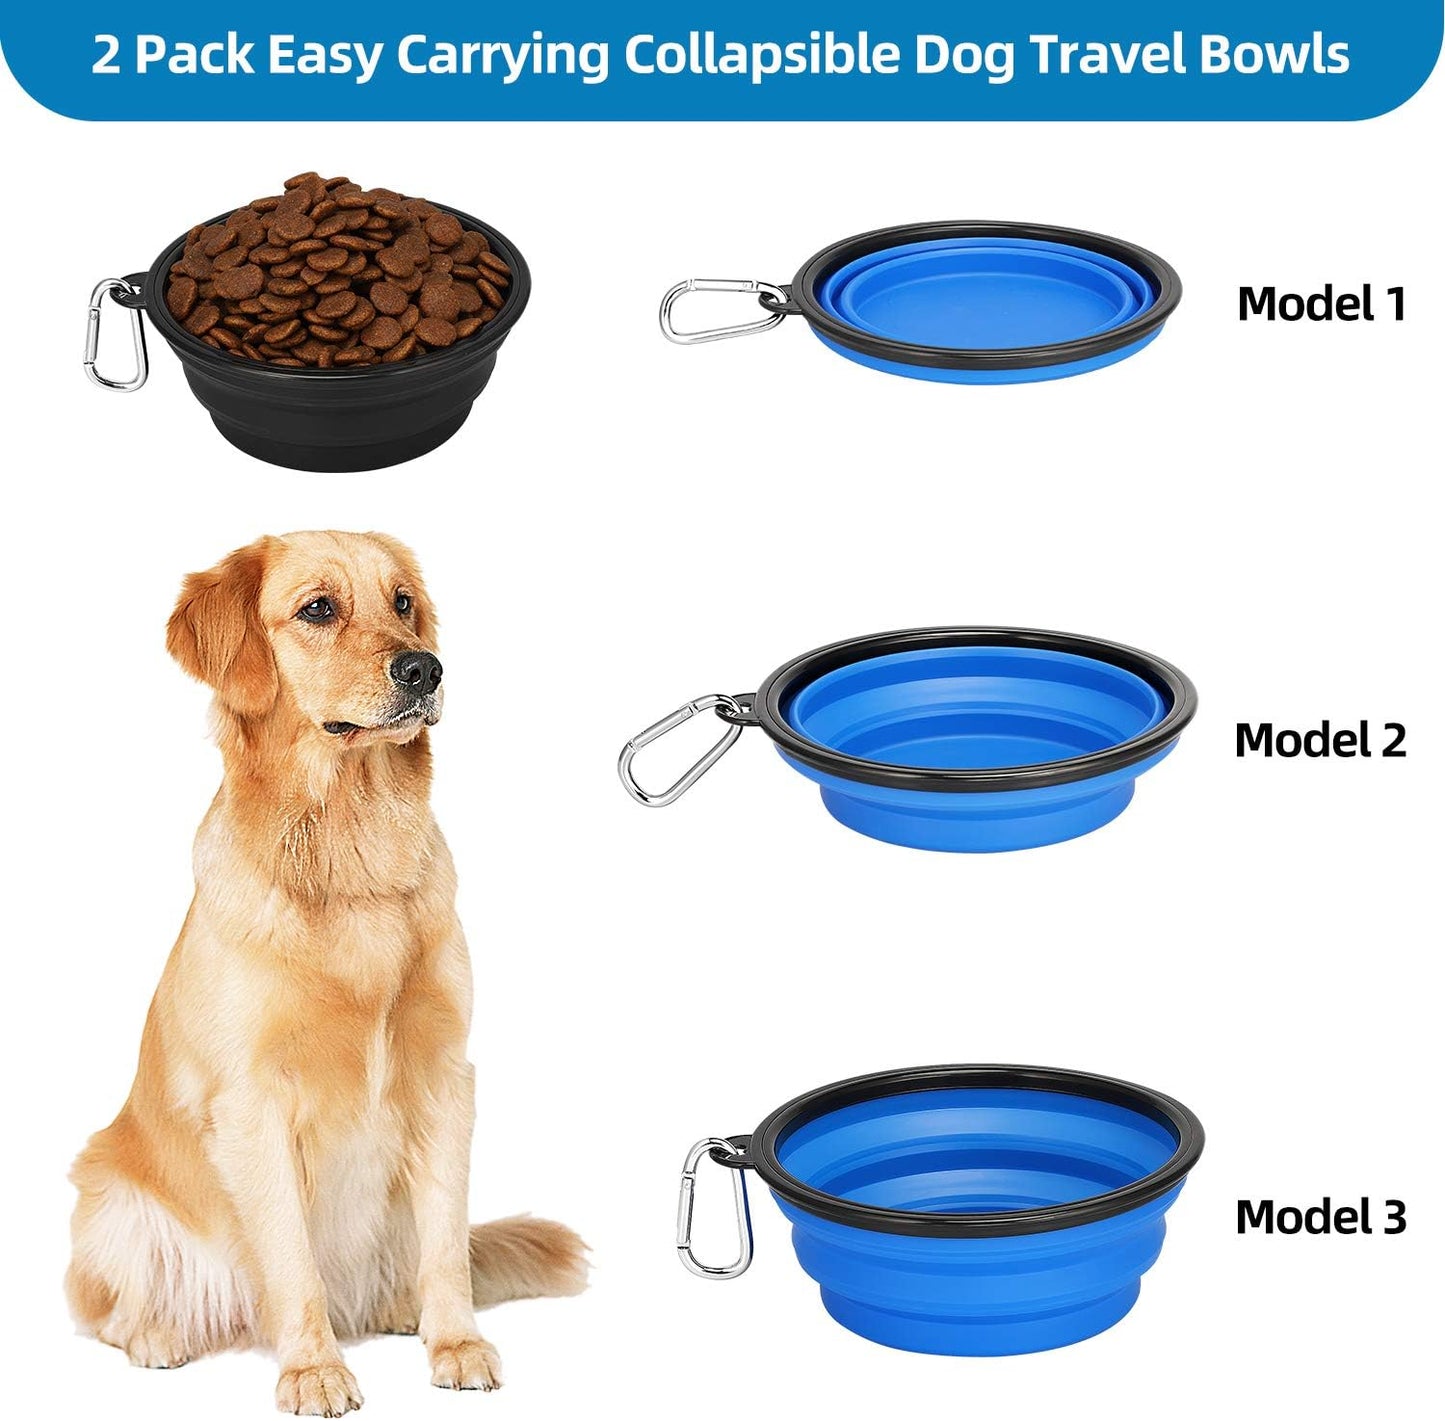 Large Collapsible Dog Bowl 2 Pack